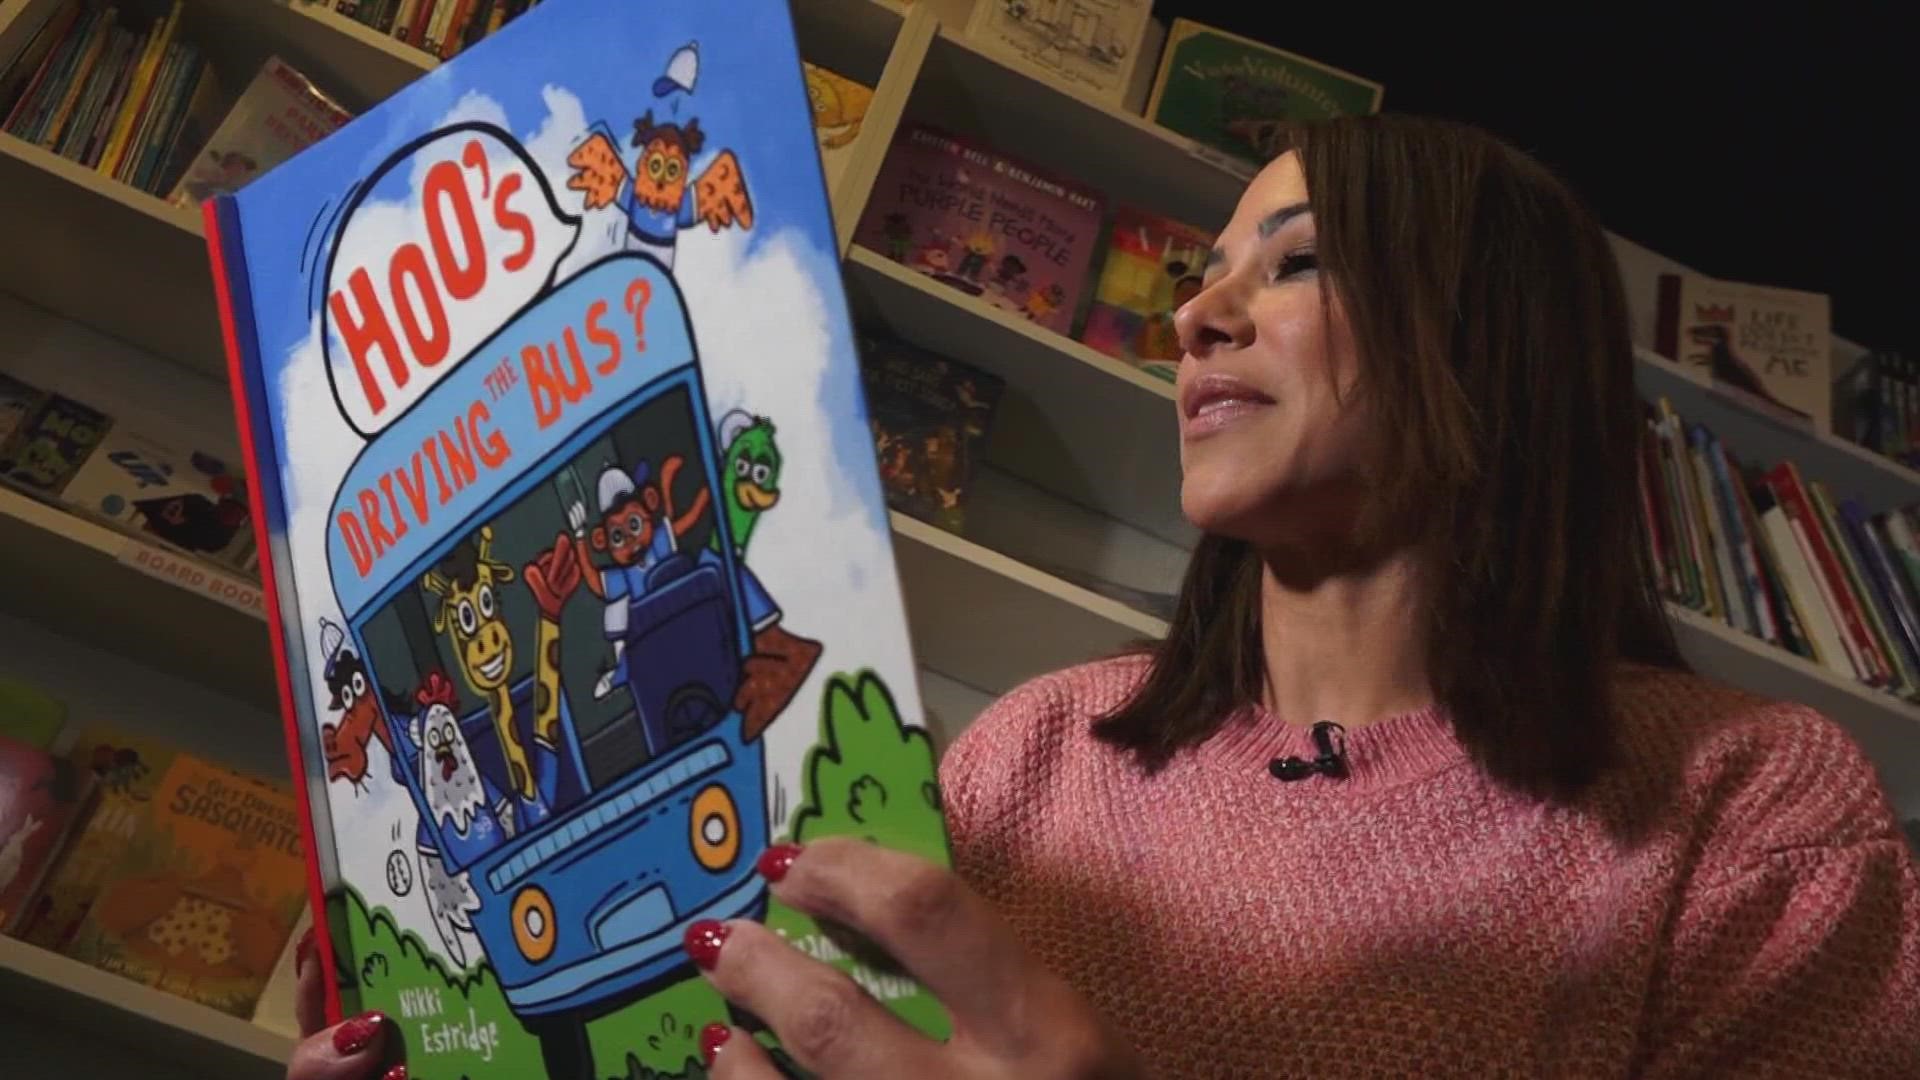 Nikki Estridge is not only an actress, athlete and entrepreneur, but now she's an author too! She just released a children's book and it's already a hit nationwide.